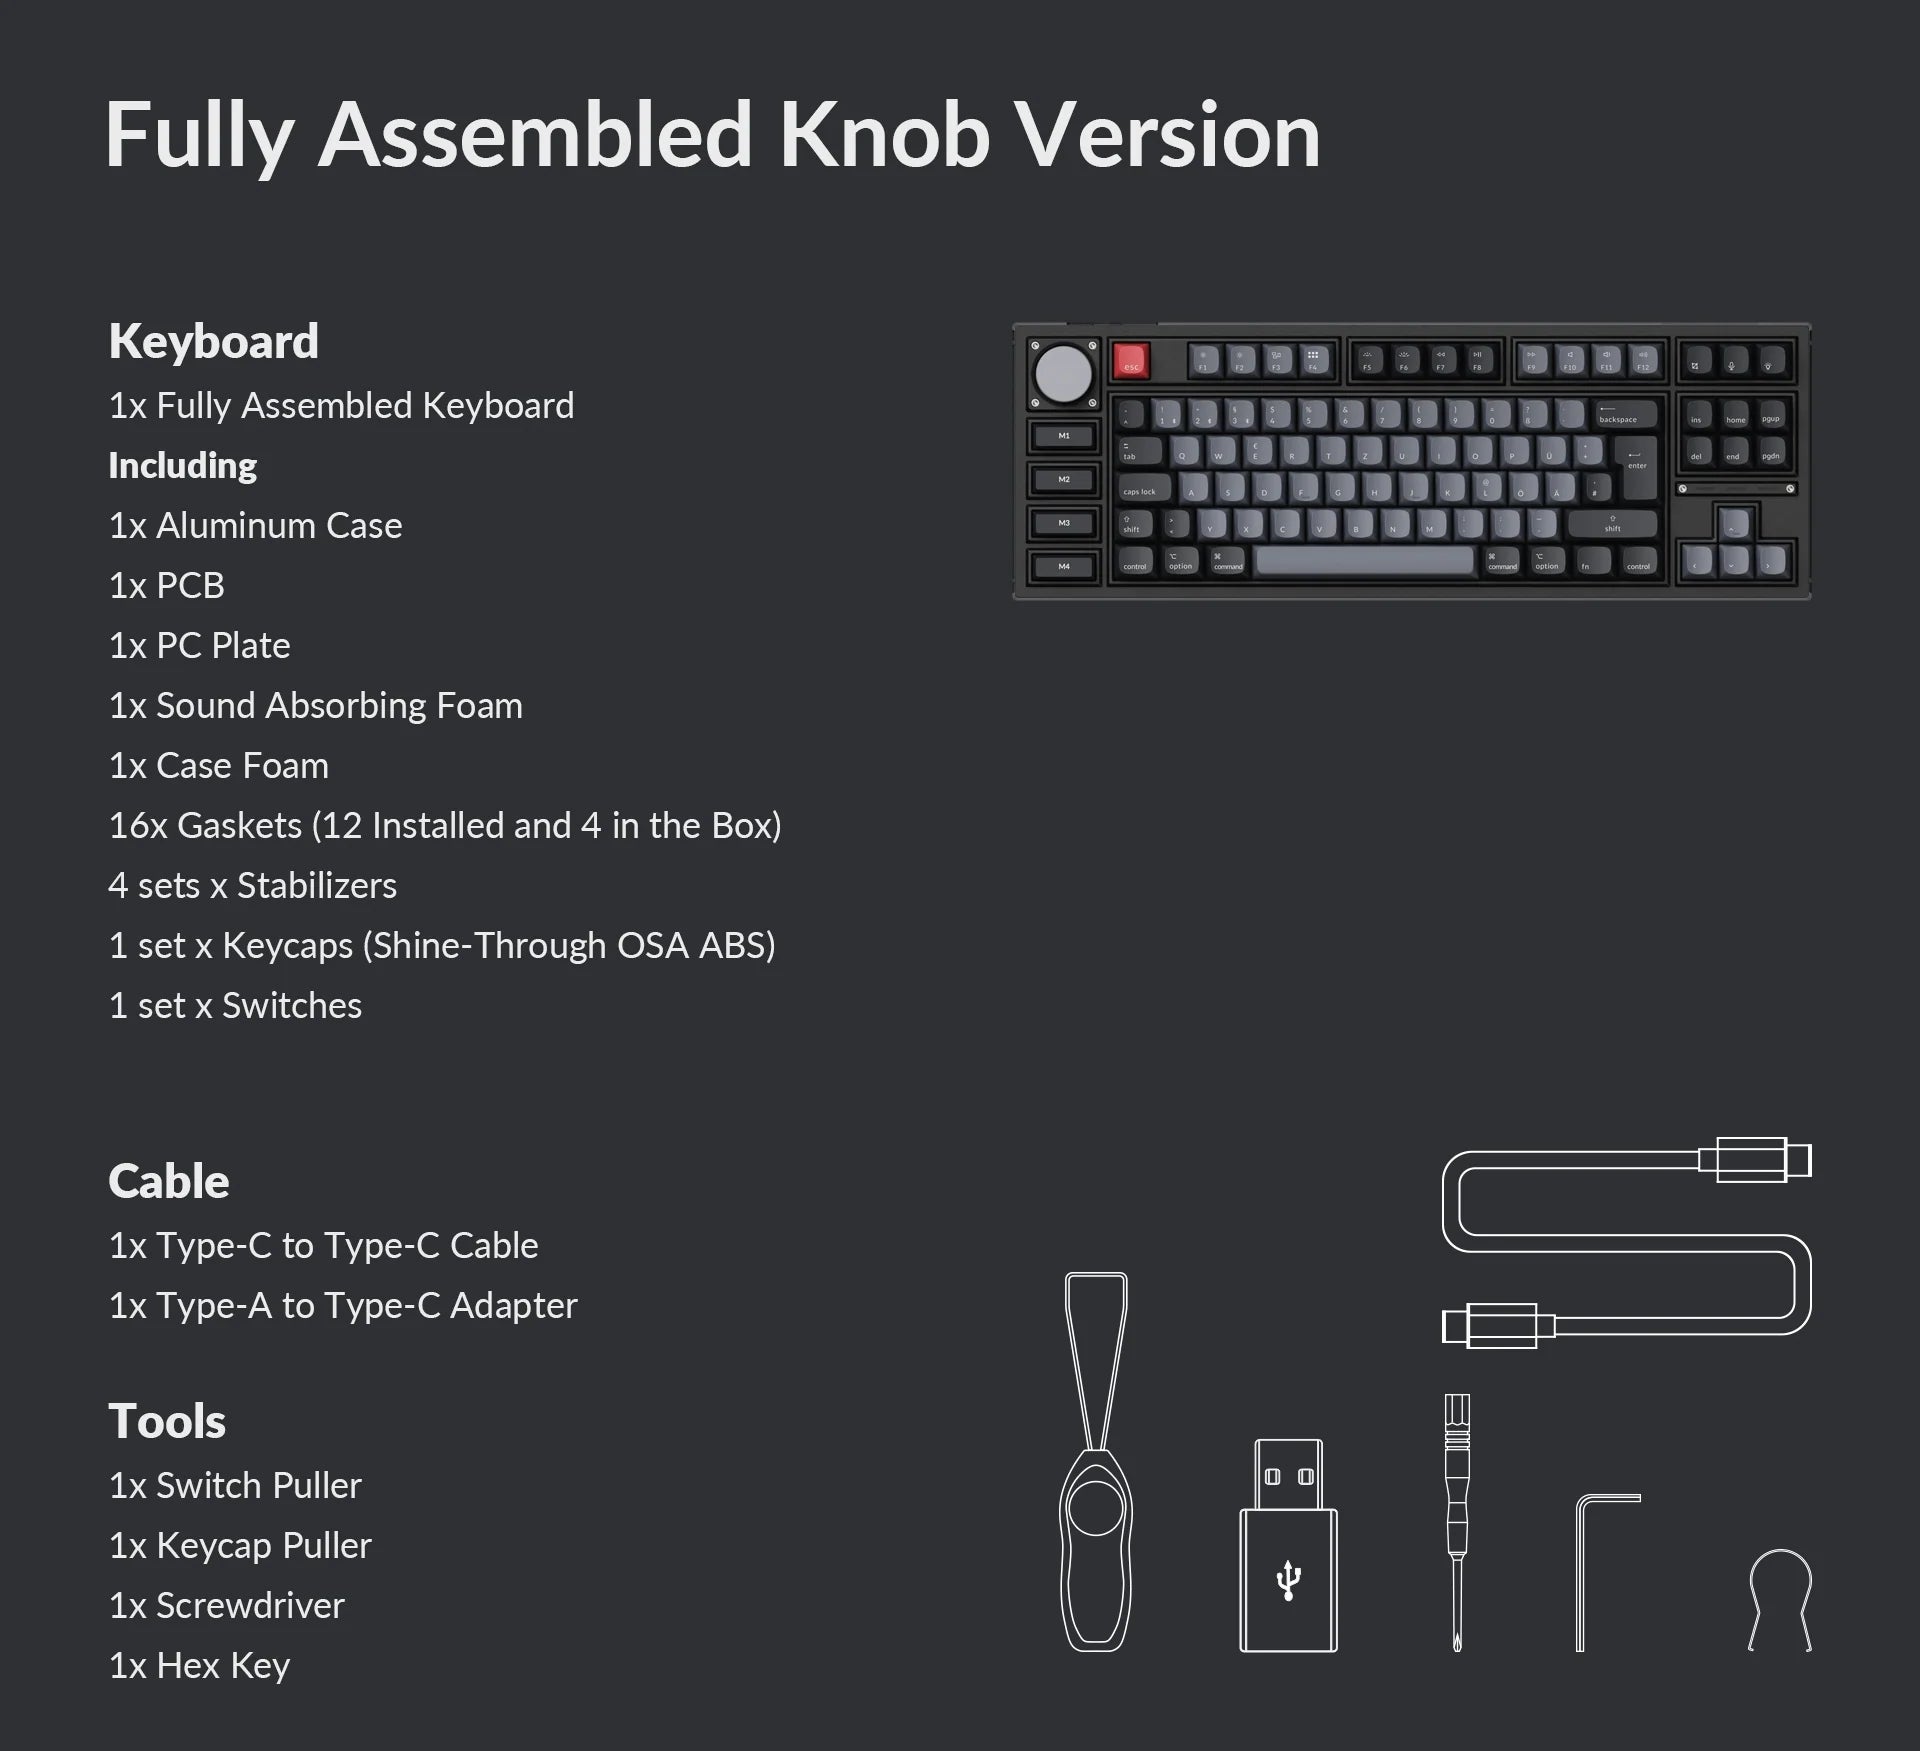 Packing list for Q3 Pro ISO fully assembled knob version